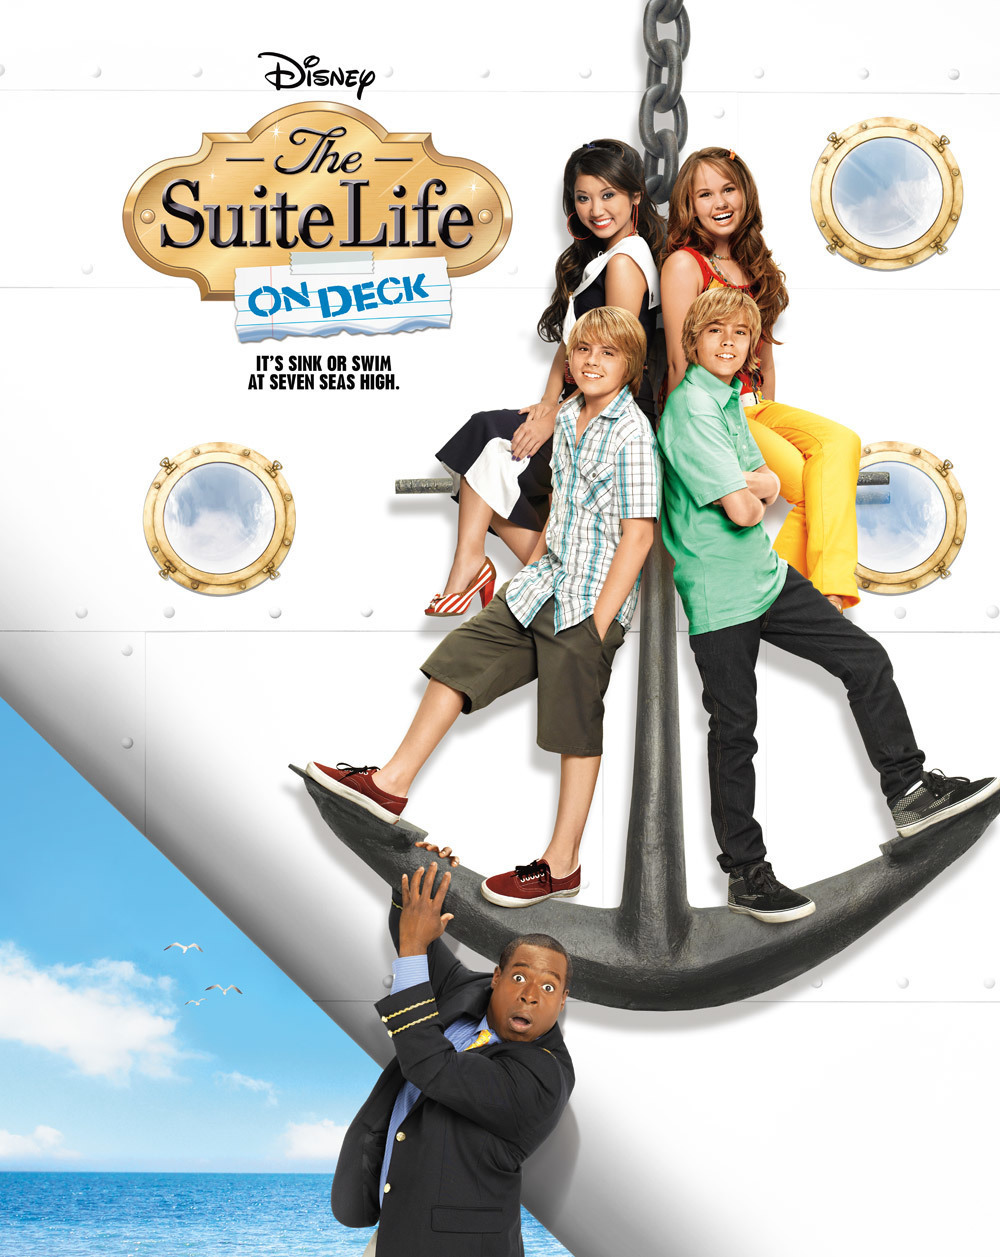 The Suite Life on Deck Disney Channel